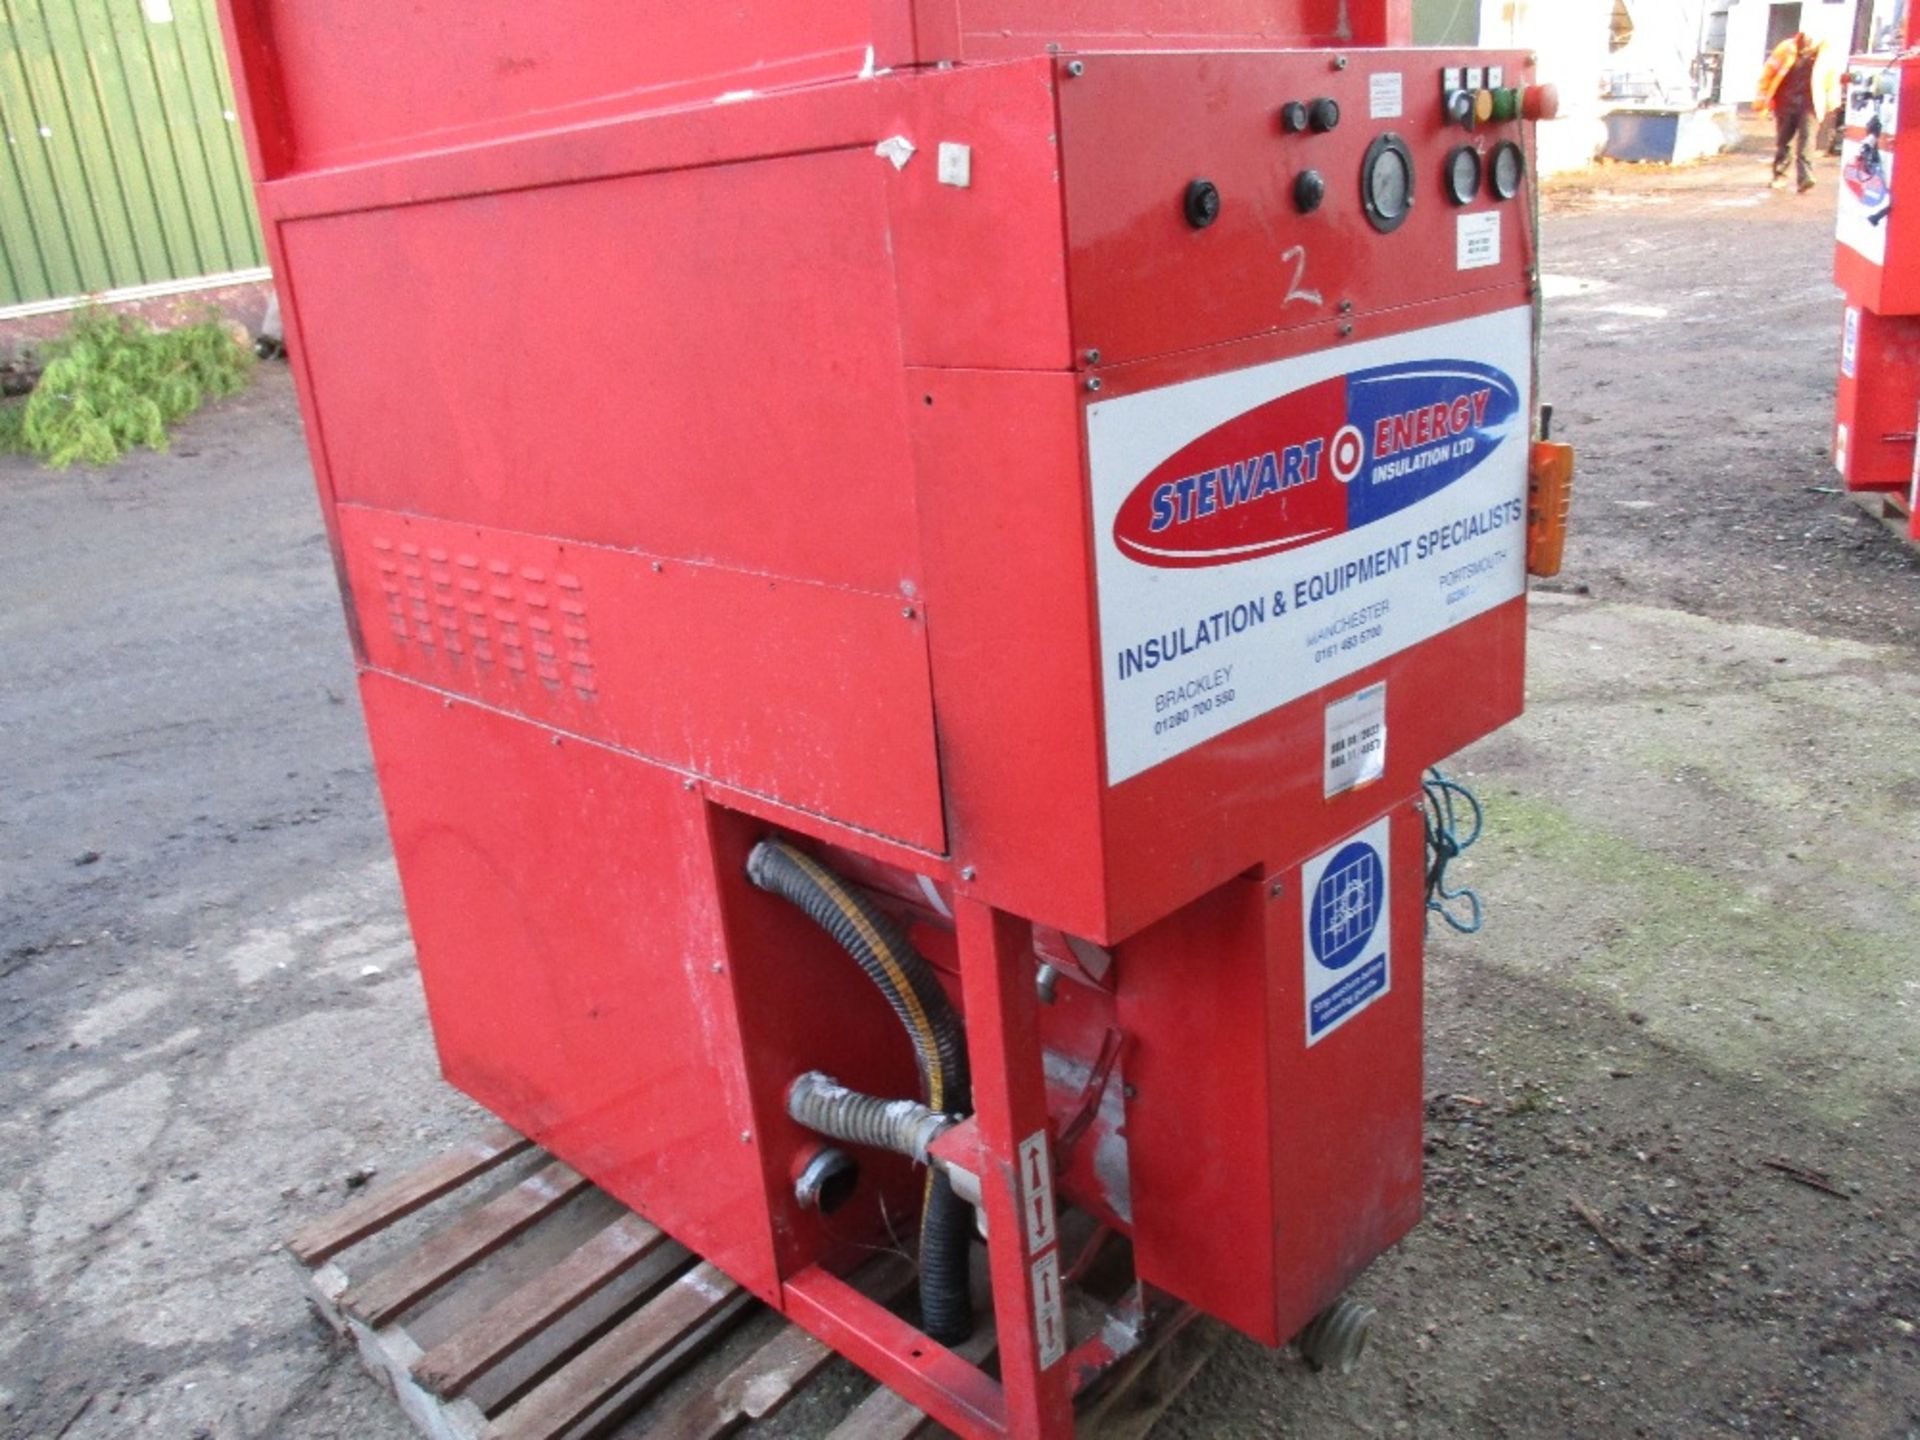 Stewart Energy Lister engined blown insulation machine sourced from company liquidation. - Image 2 of 6